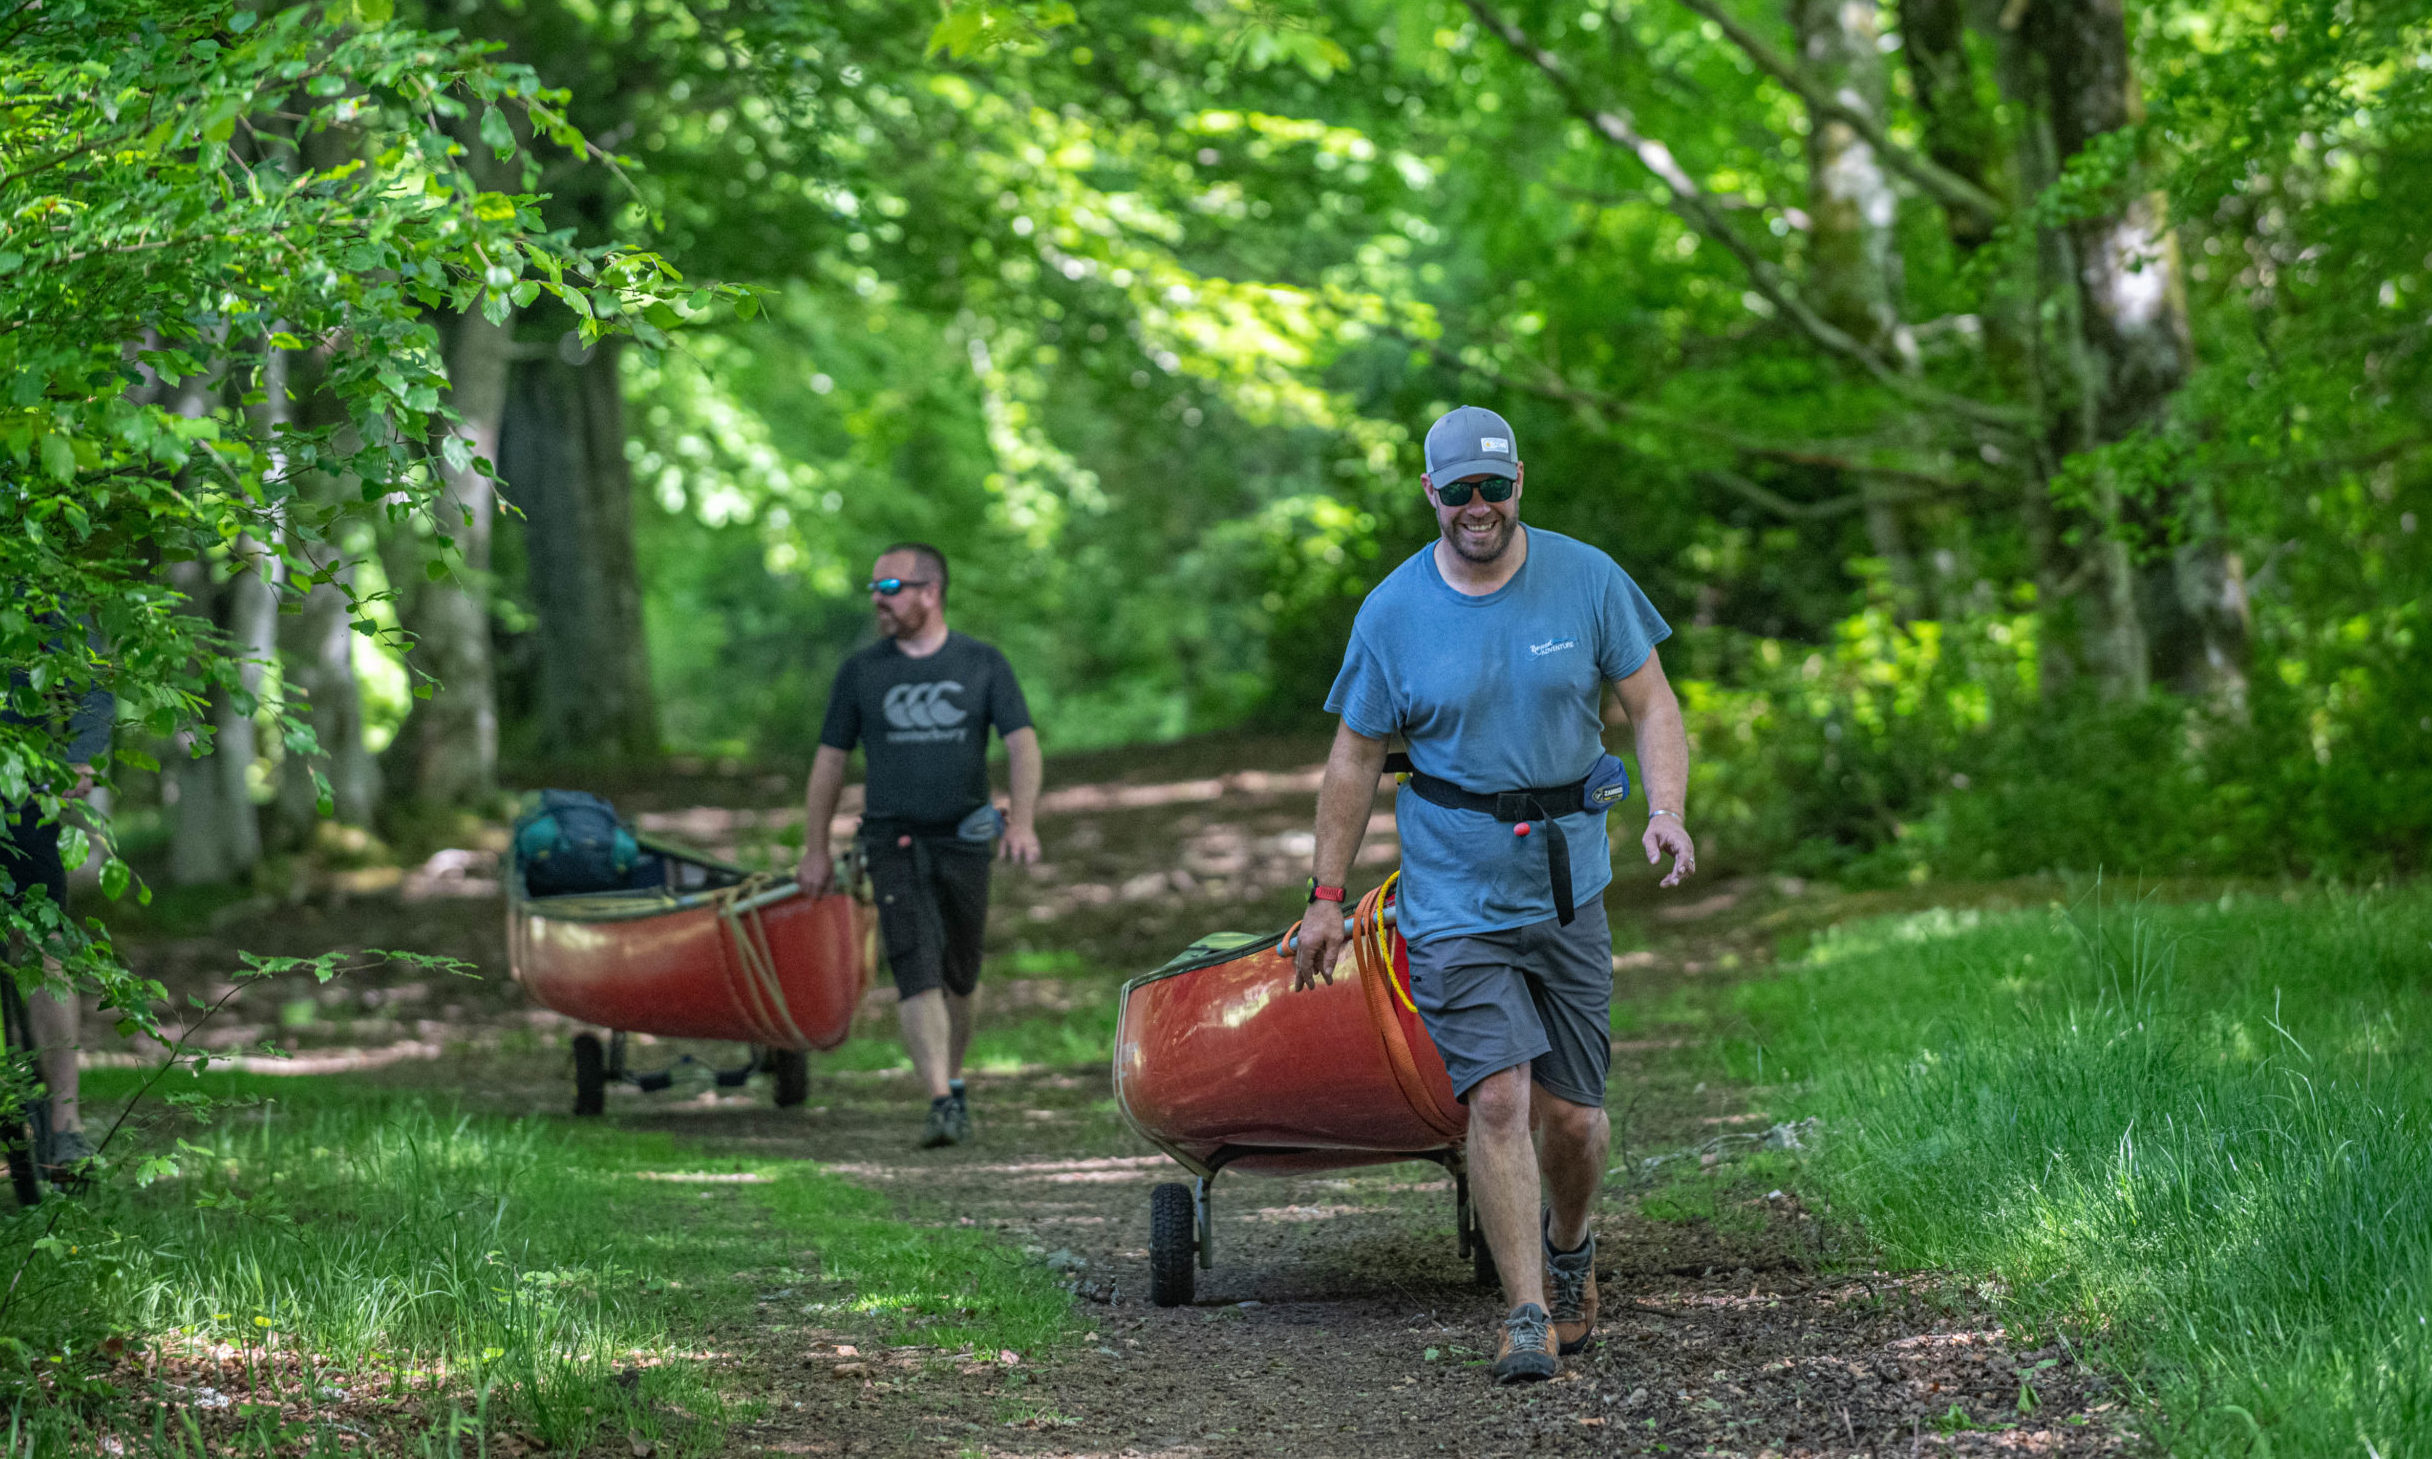 Mark French and Ross Dempster of Beyond Adventure take their canoes for a hike in aid of local causes